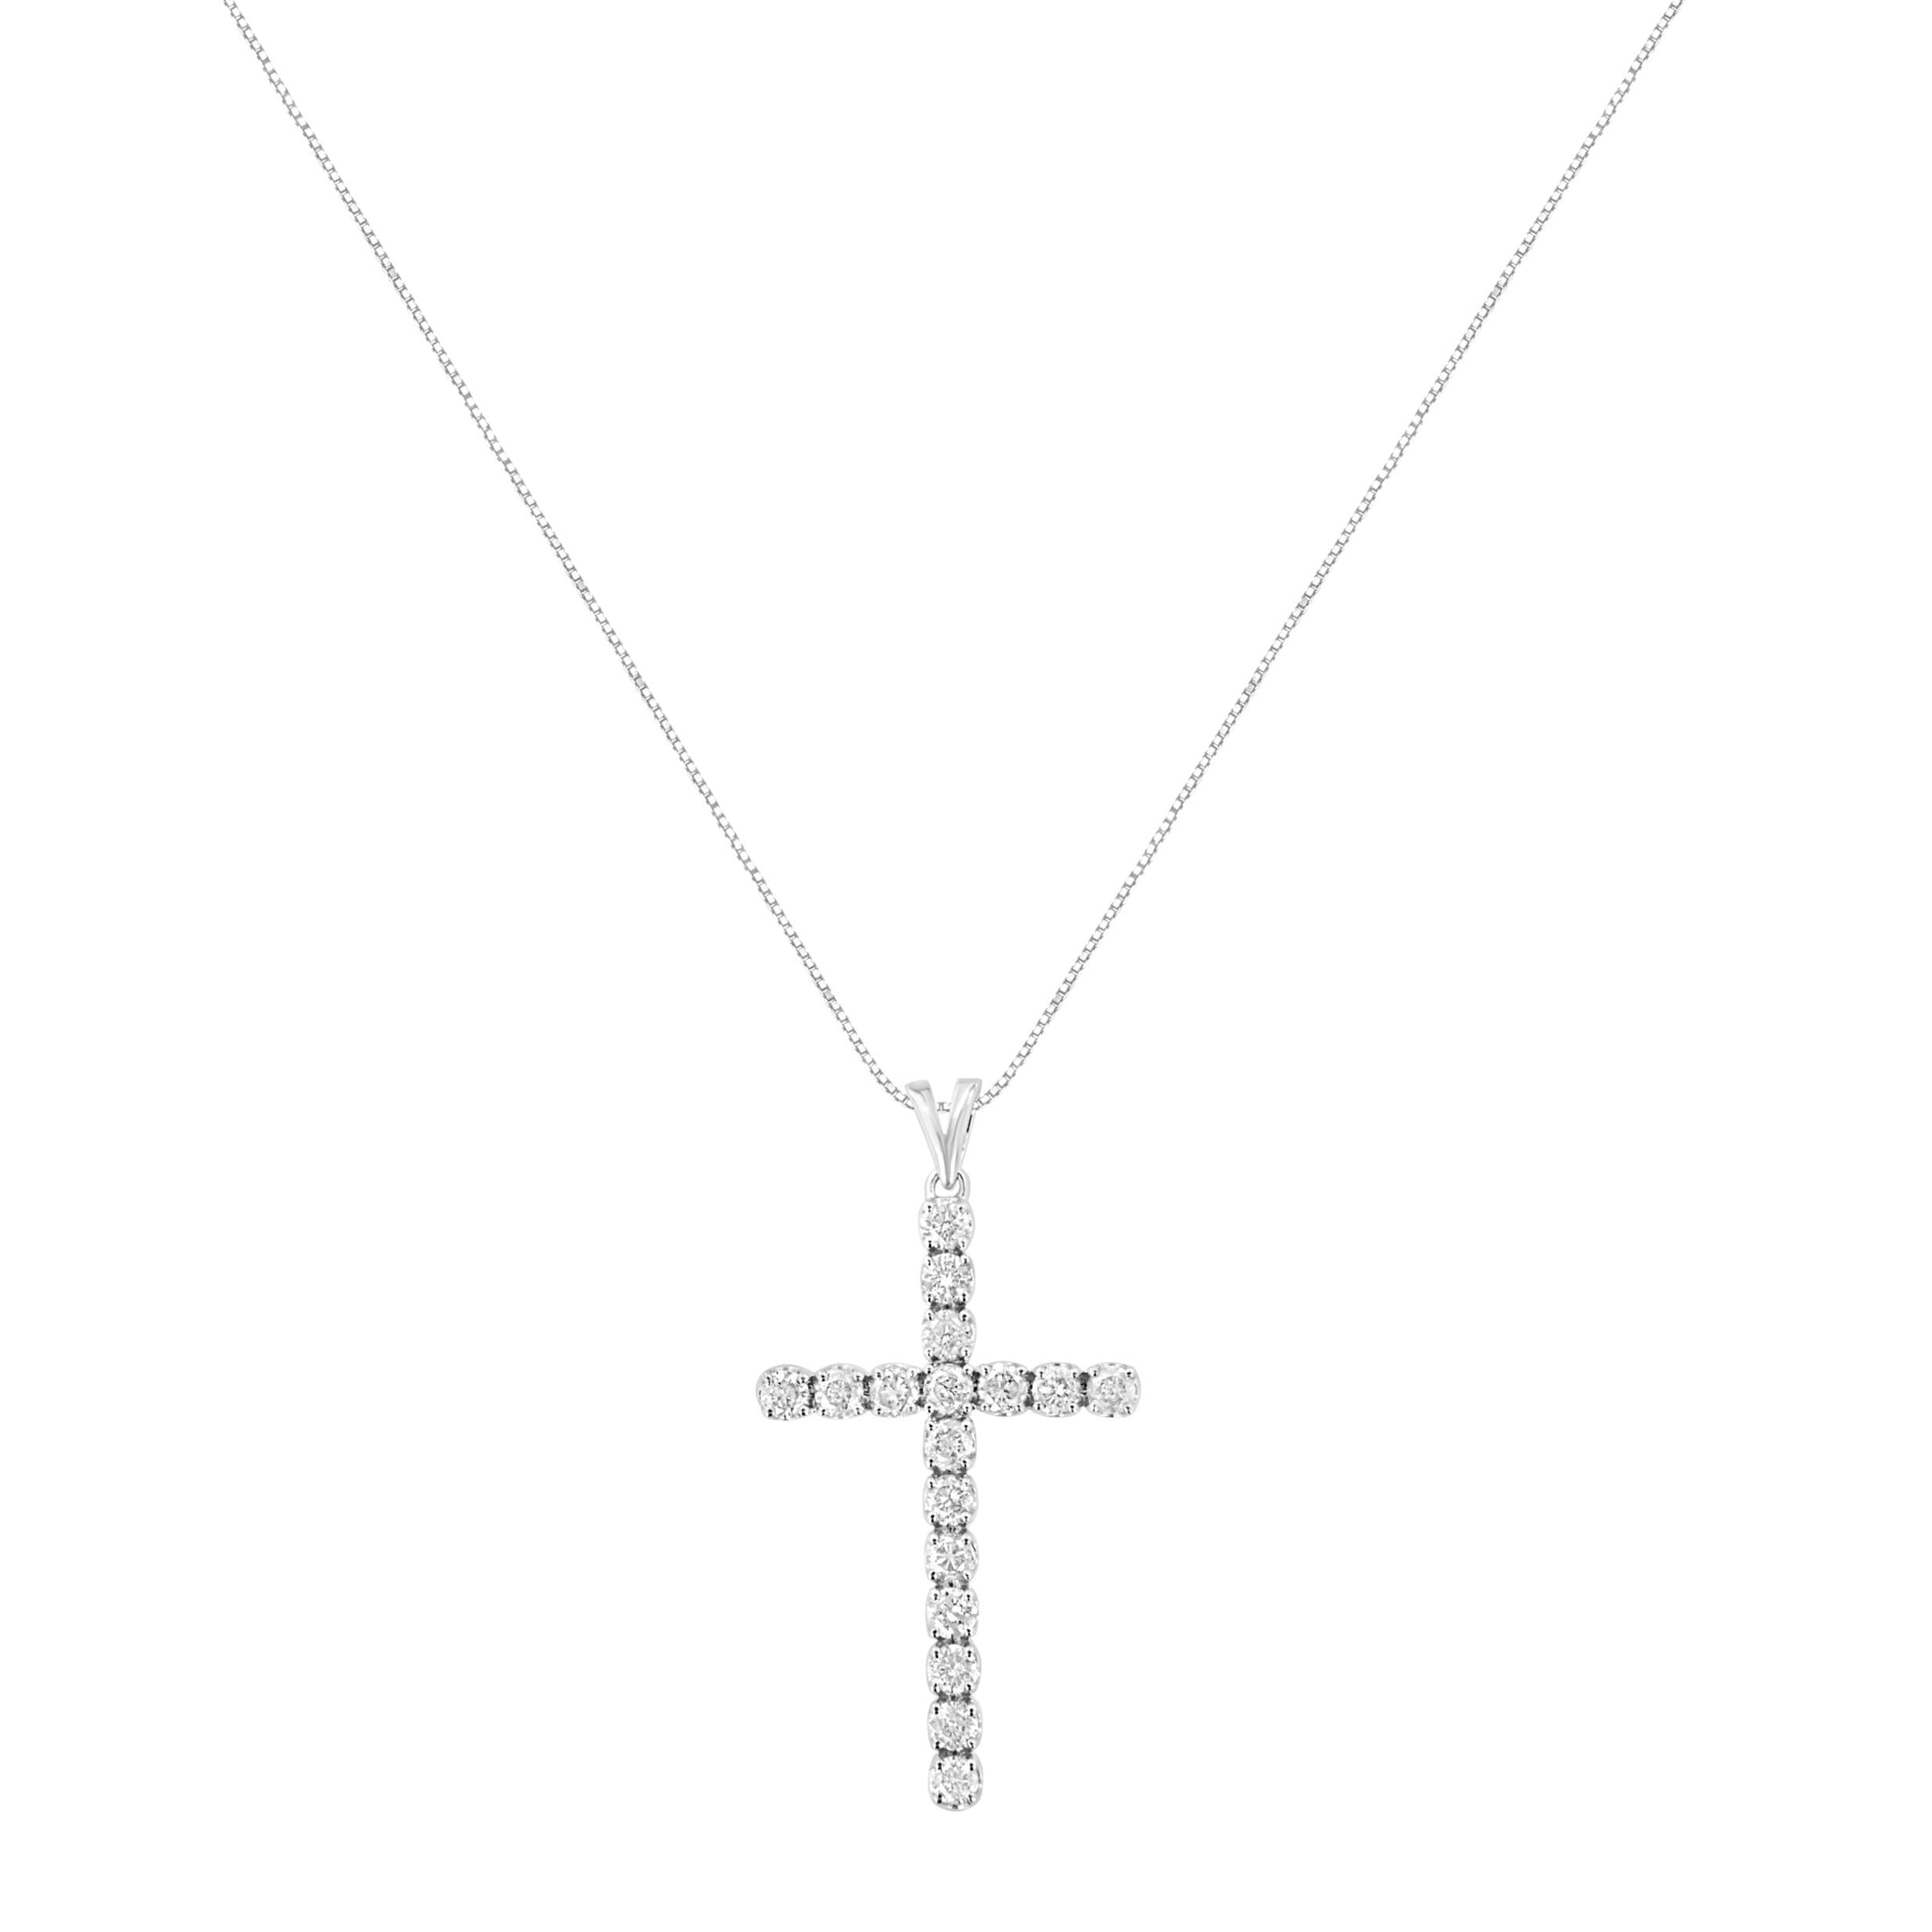 .925 Sterling Silver 2 cttw Classic Prong Set Round-Cut Diamond Cross 18" Pendant Necklace